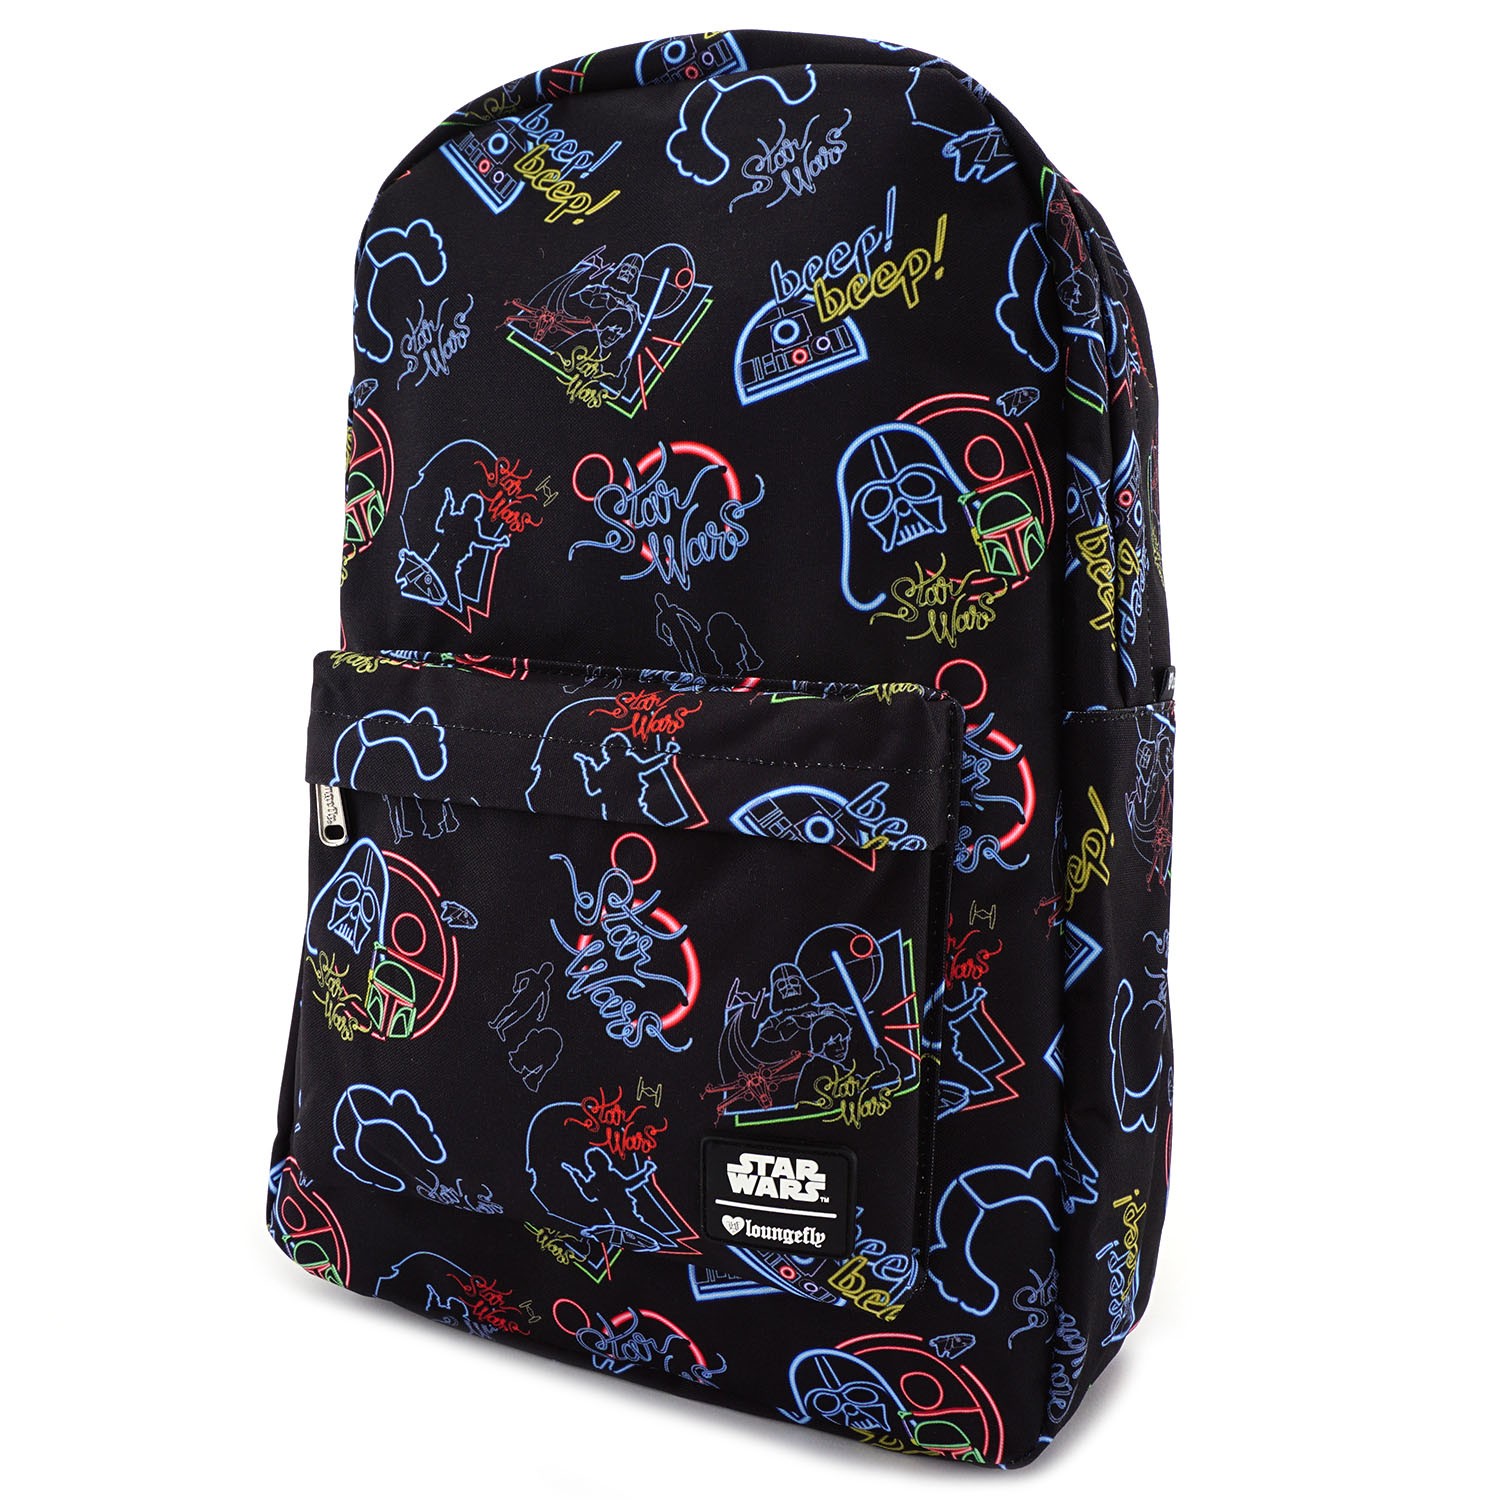 Loungefly x Star Wars Neon Print Backpack